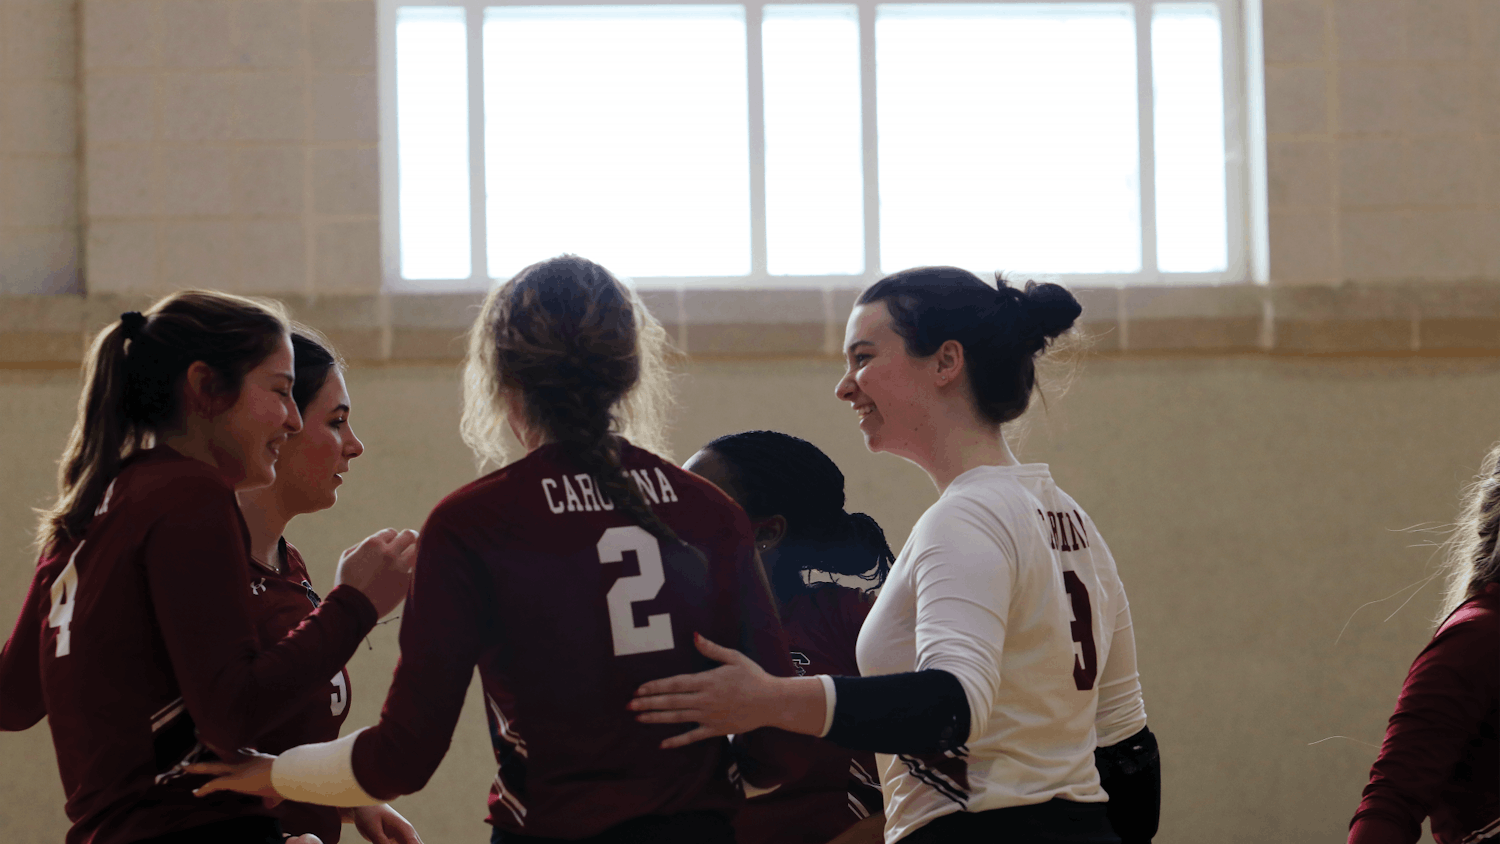 The women’s club volleyball garnet team comes together after a successful set against the College of Charleston at its home Gamecock Classic tournament on Feb. 4, 2023. The garnet team pictured, made up of junior outside Ashlee Johnstone, sophomore libero/DS Rachel Hebblethwaite, junior middle Maddie Mitchum, sophomore right side Alanna Harder and senior setter Preya Simmons, earned silver in the tournament after a hard fought match.